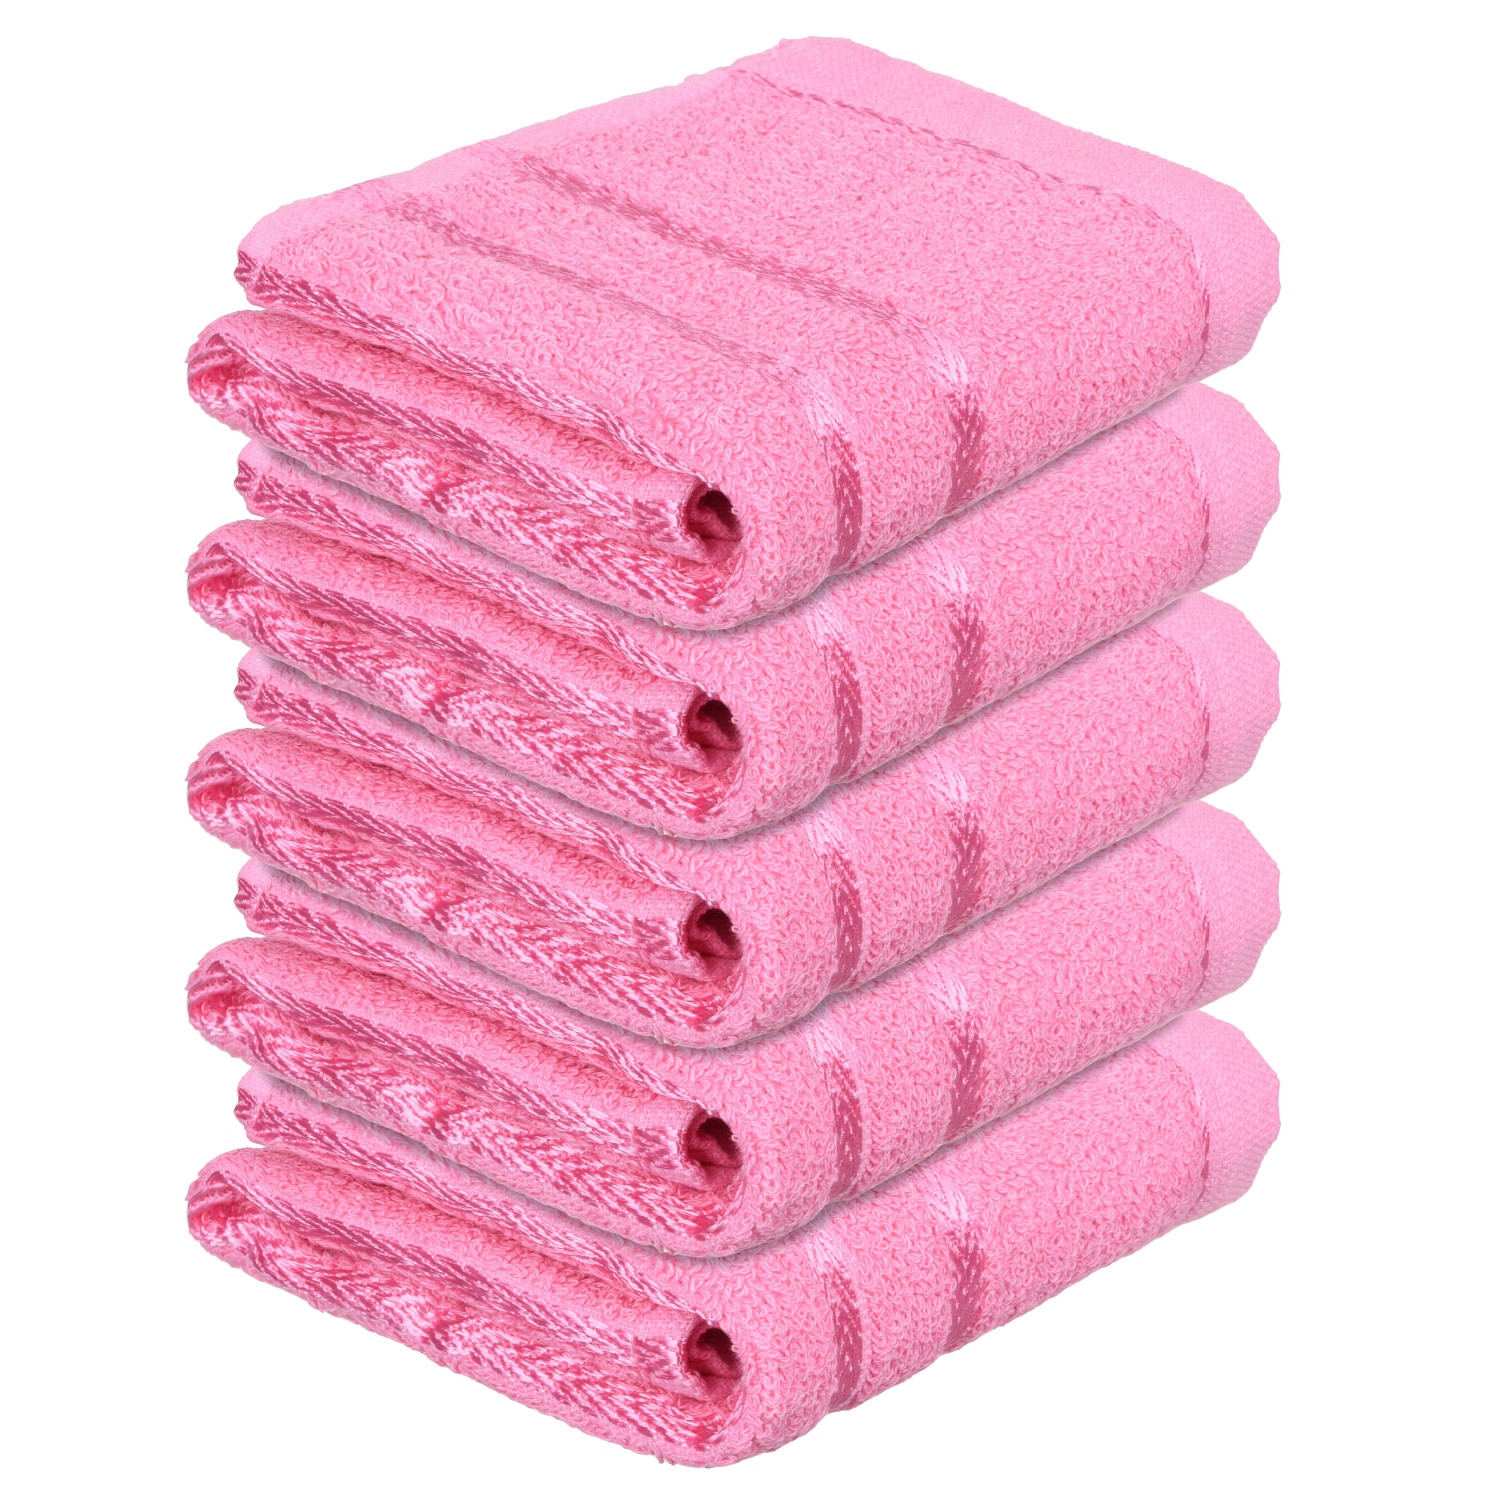 Kuber Industries Face Towel | Towels for Facewash | Towels for Gym | Facewash for Travel | Towels for Daily use | Workout Hand Towel | Lining Design | 14x21 Inch|Pink